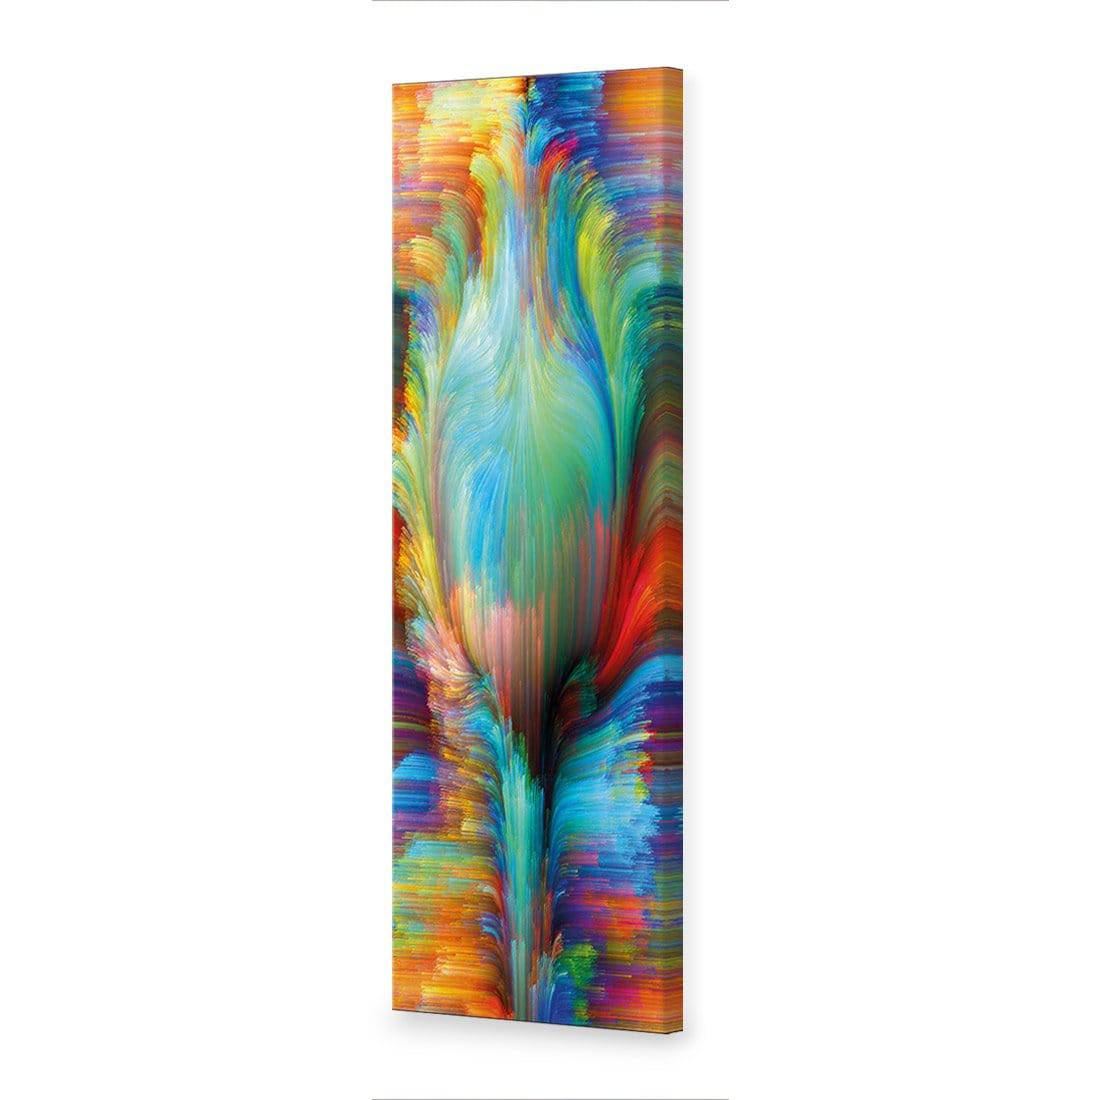 Fuzz Sprouting Canvas Art-Canvas-Wall Art Designs-60x20cm-Canvas - No Frame-Wall Art Designs